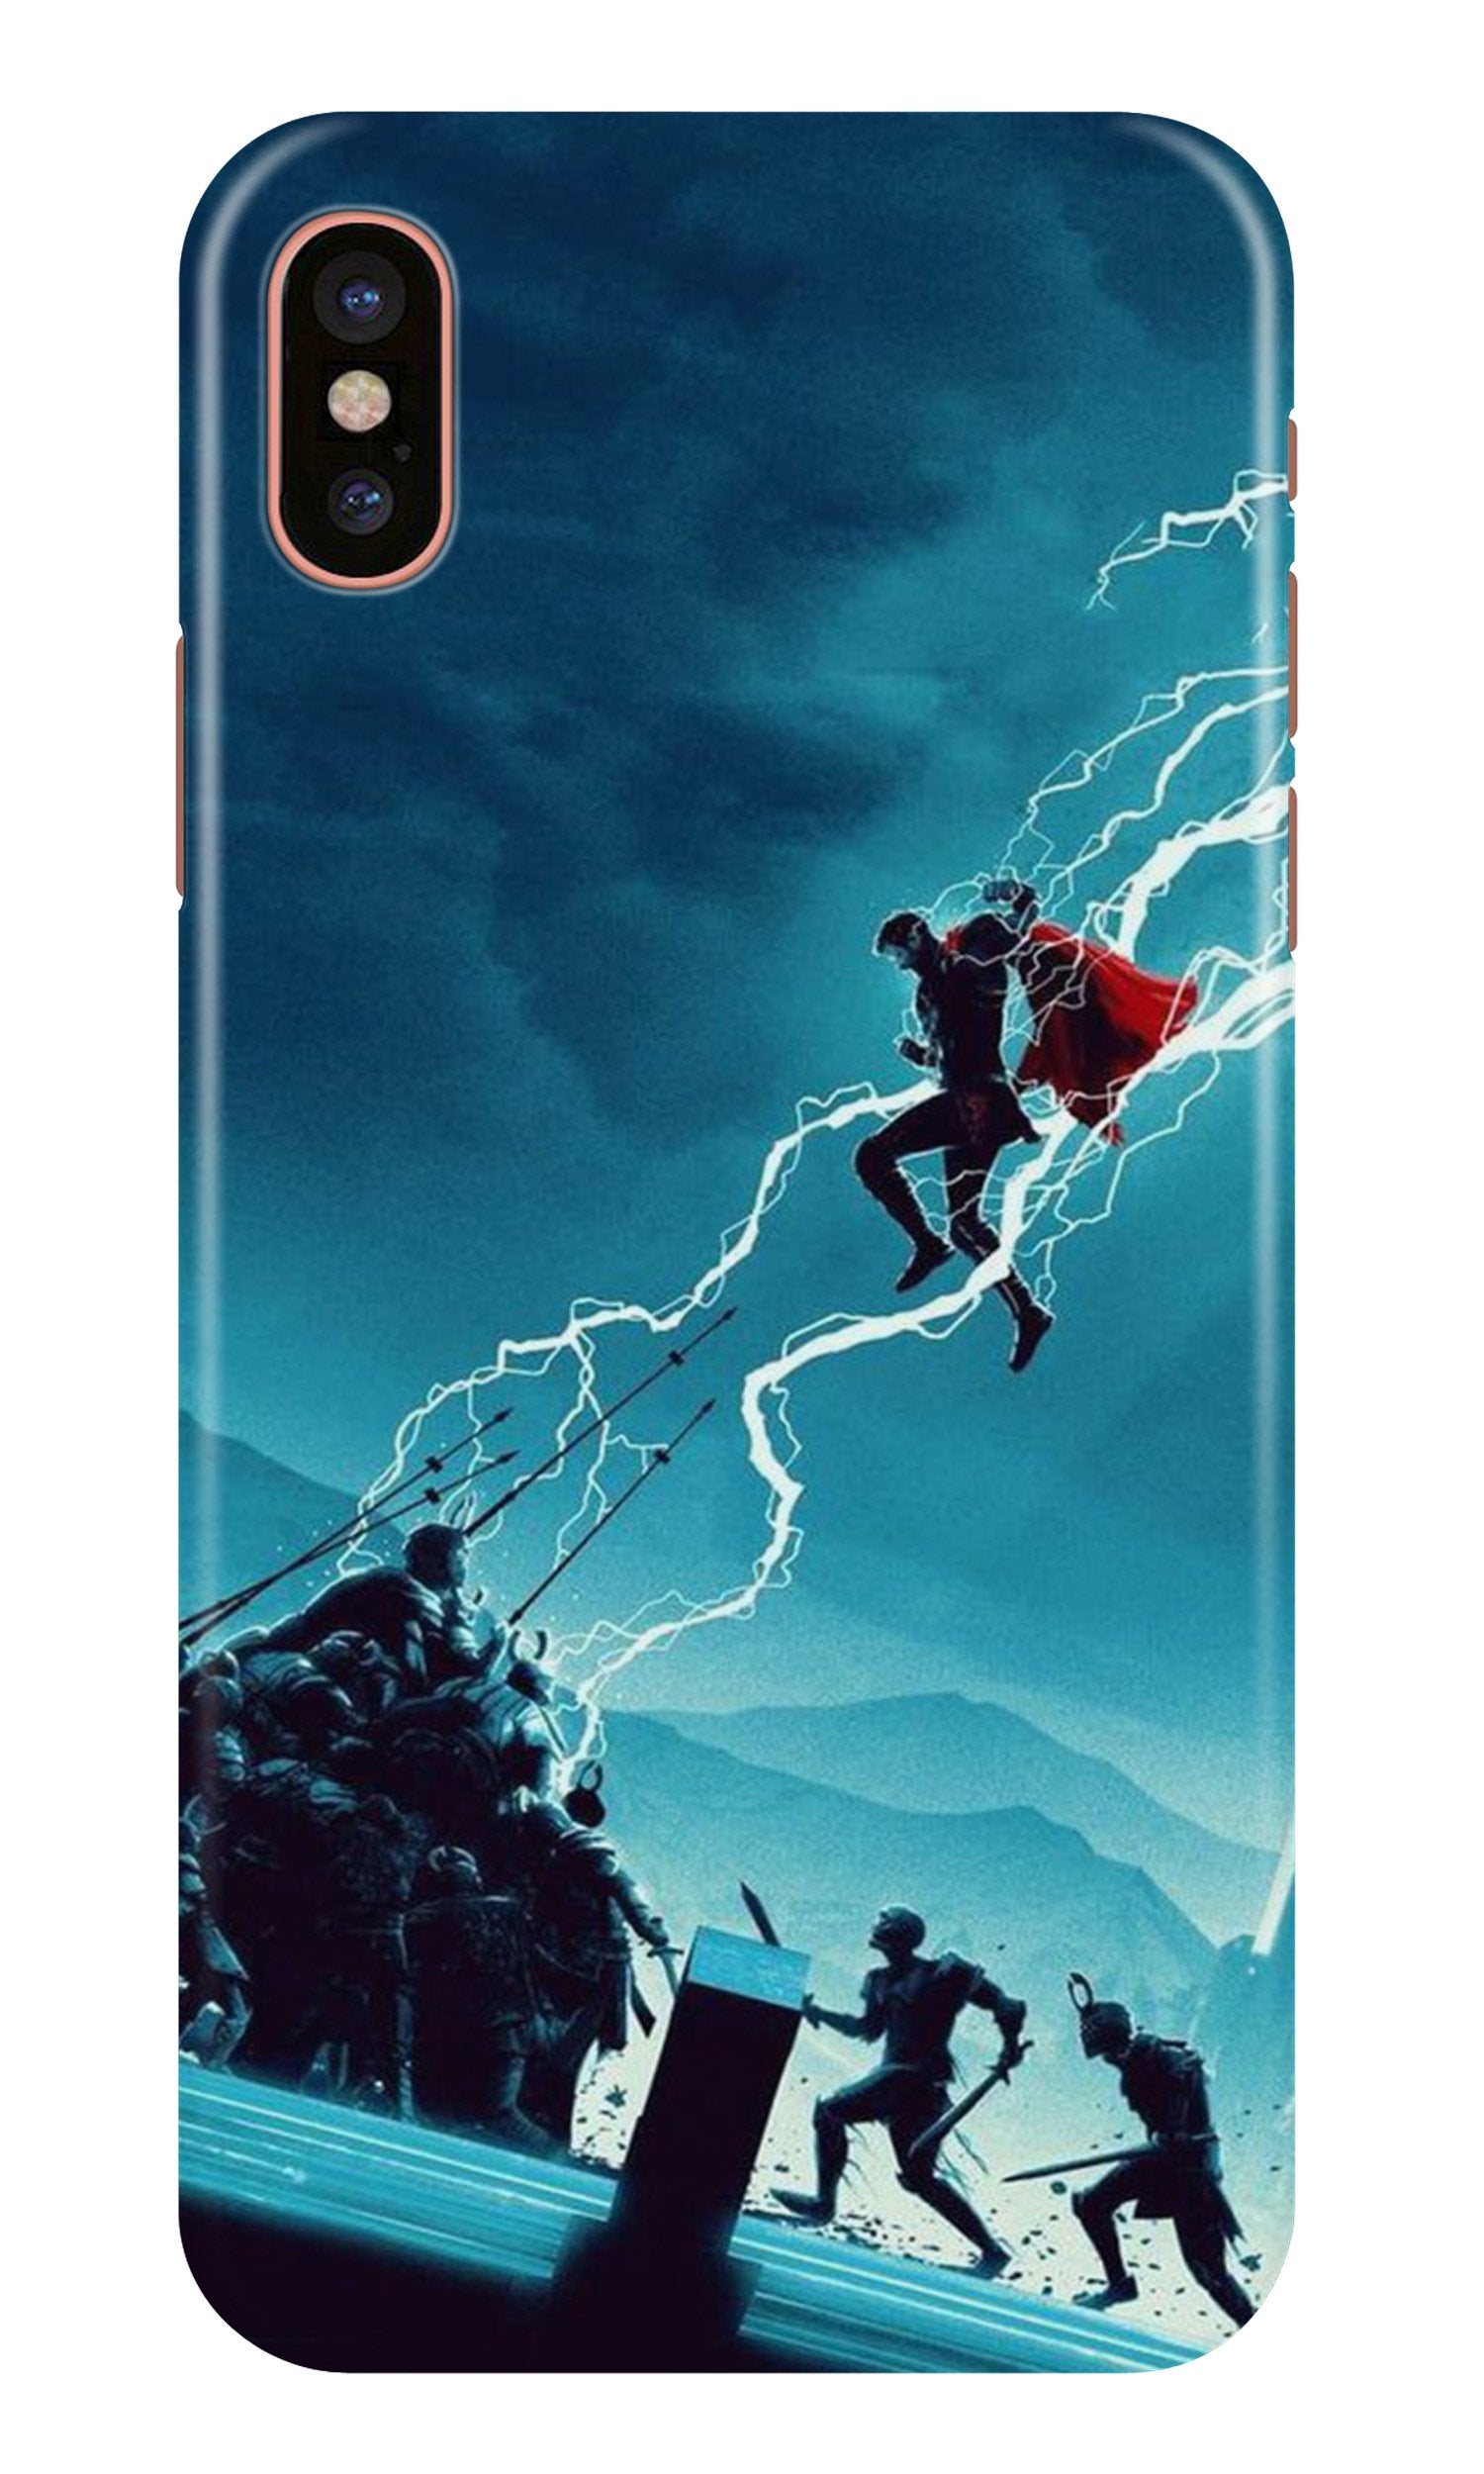 Thor Avengers Case for iPhone Xs Max (Design No. 243)